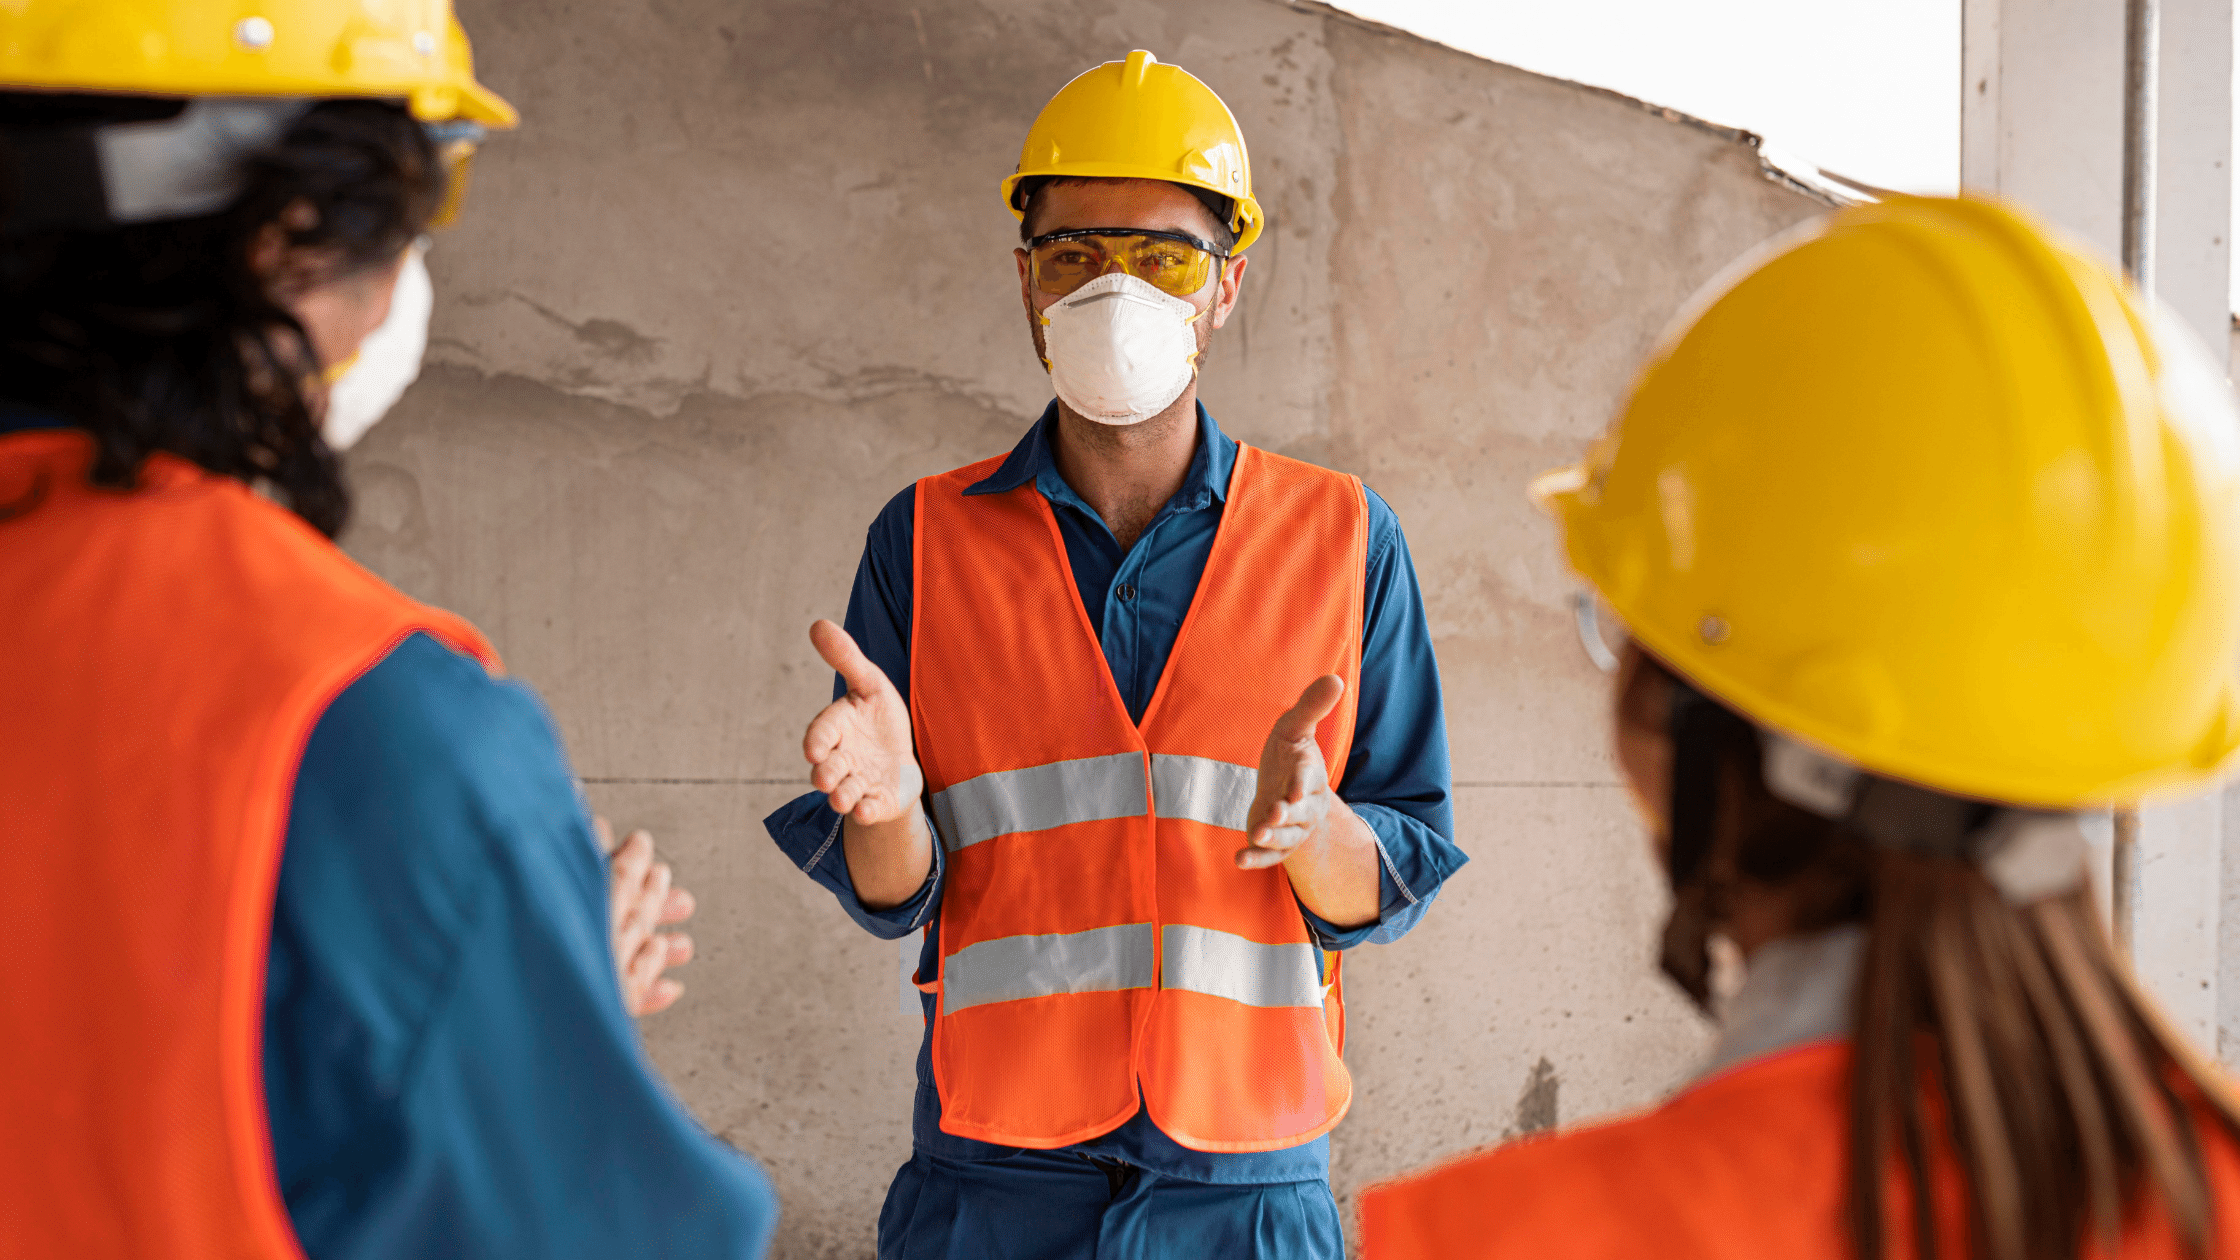 8 Reasons To Brief New Hires On Safety Protocols